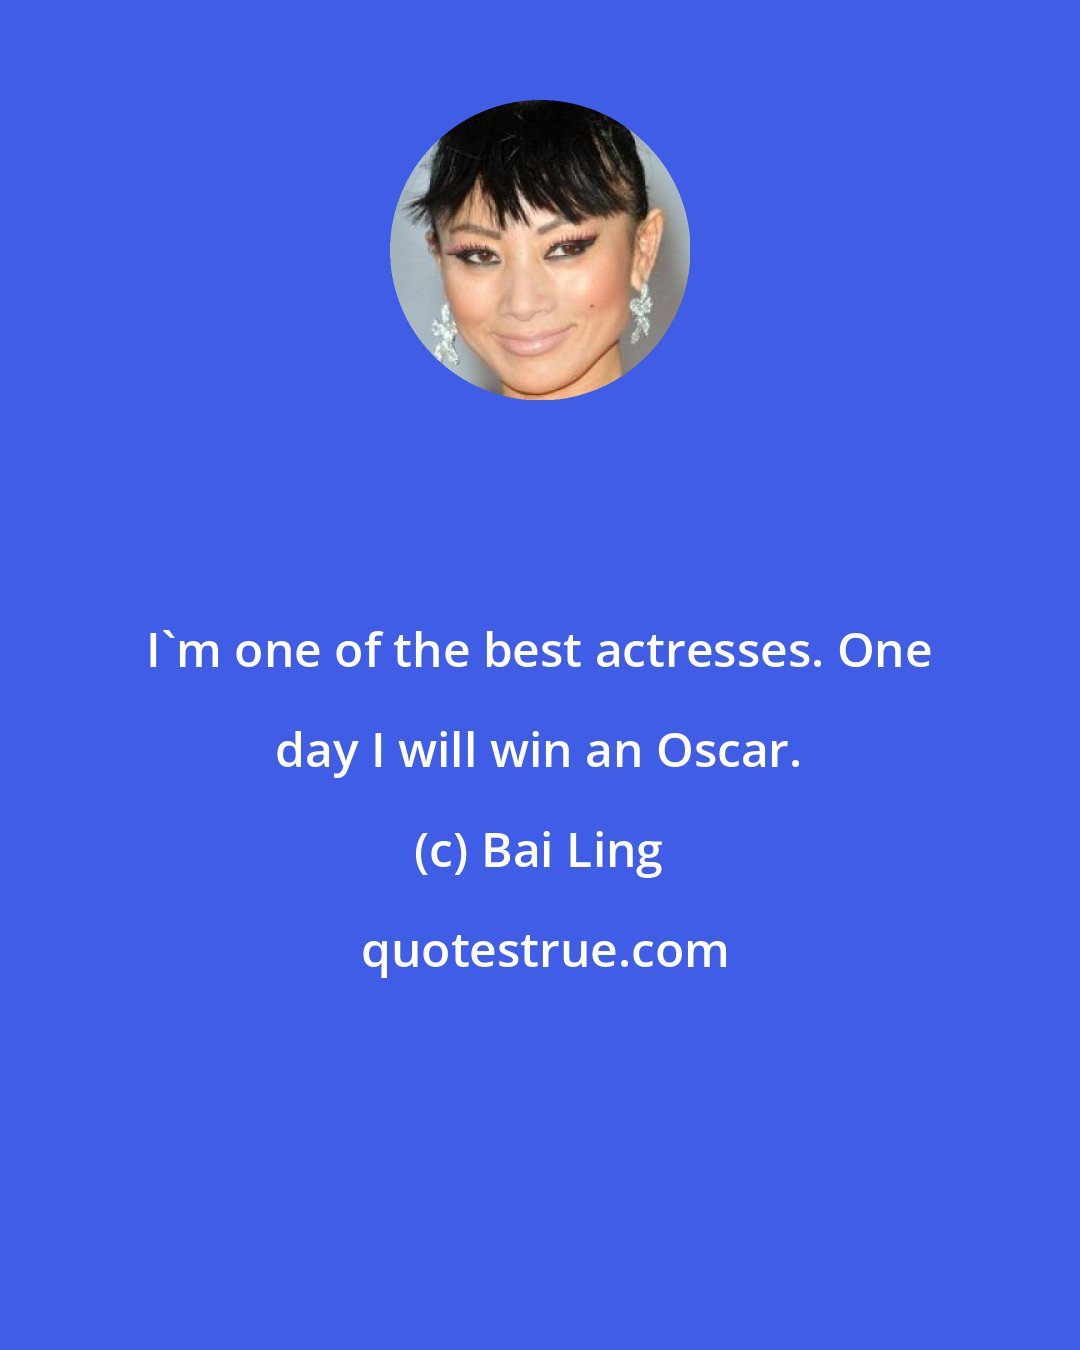 Bai Ling: I'm one of the best actresses. One day I will win an Oscar.